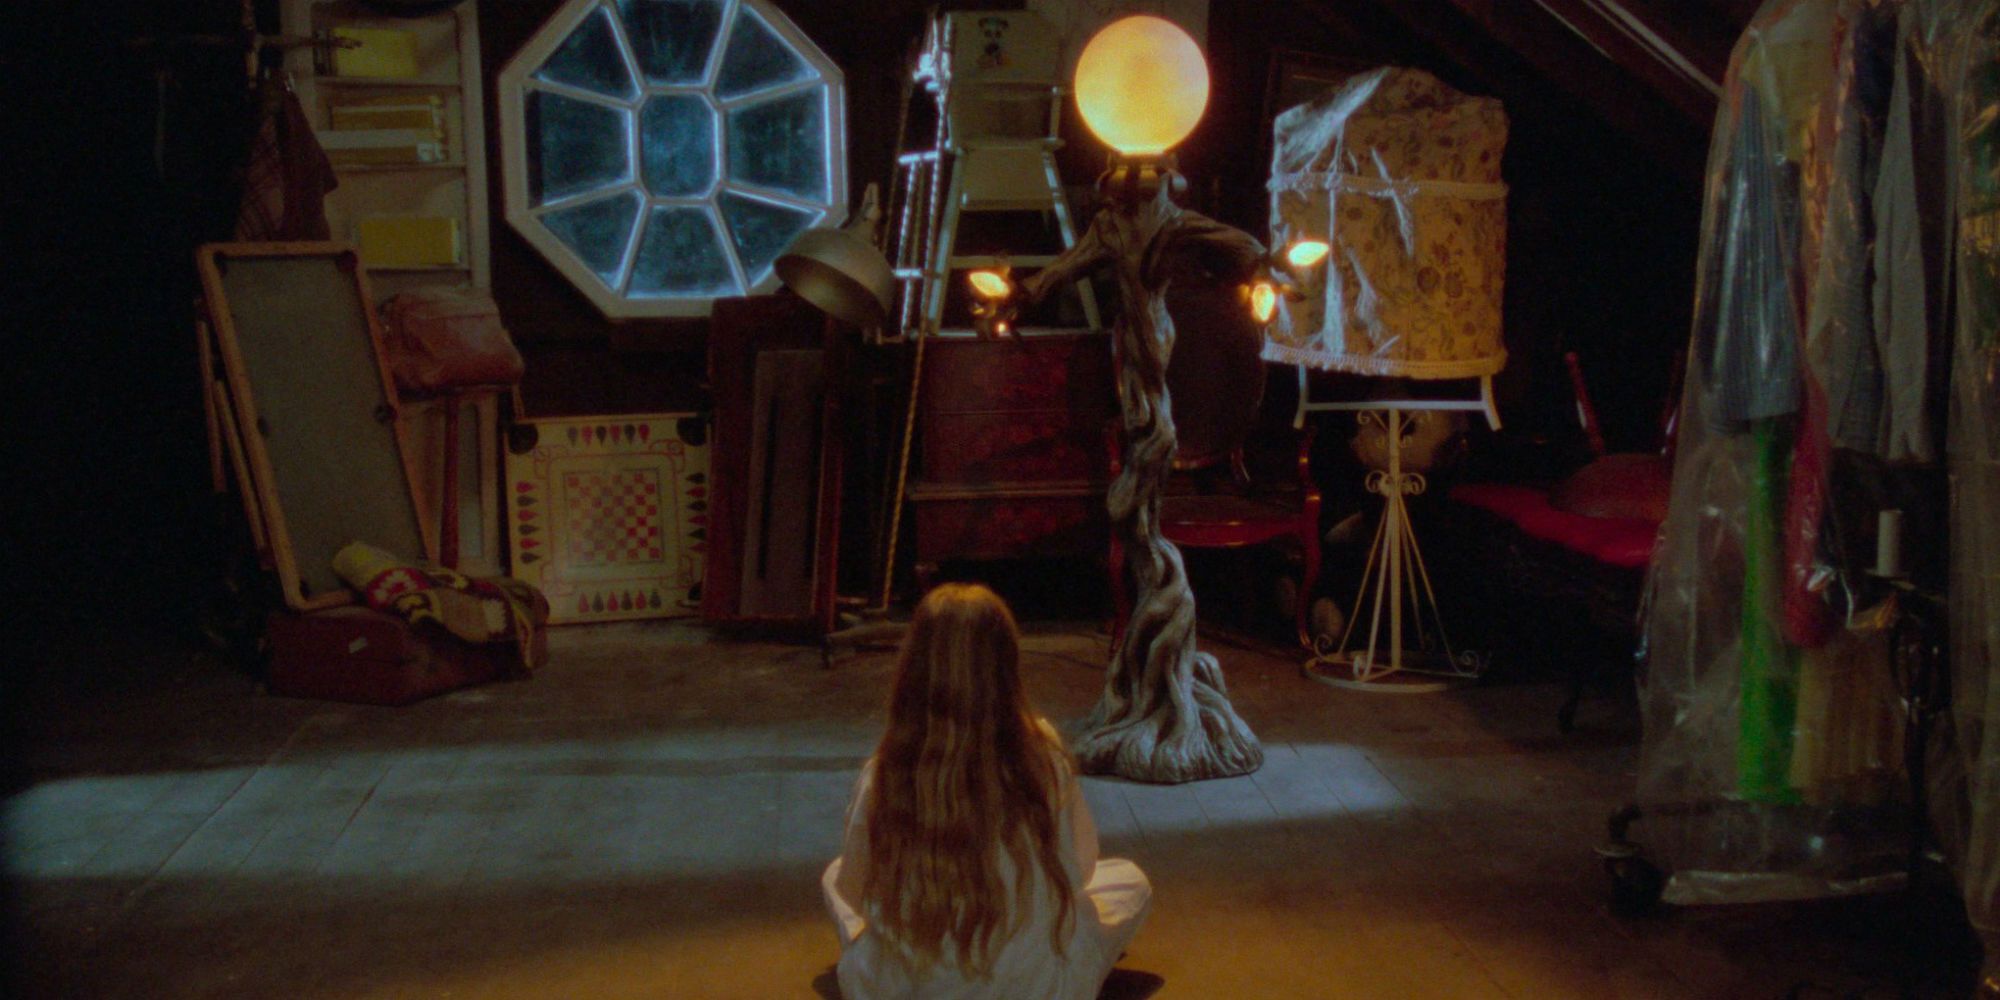 A little girl sits next to a possessed lamp in Amityville 4